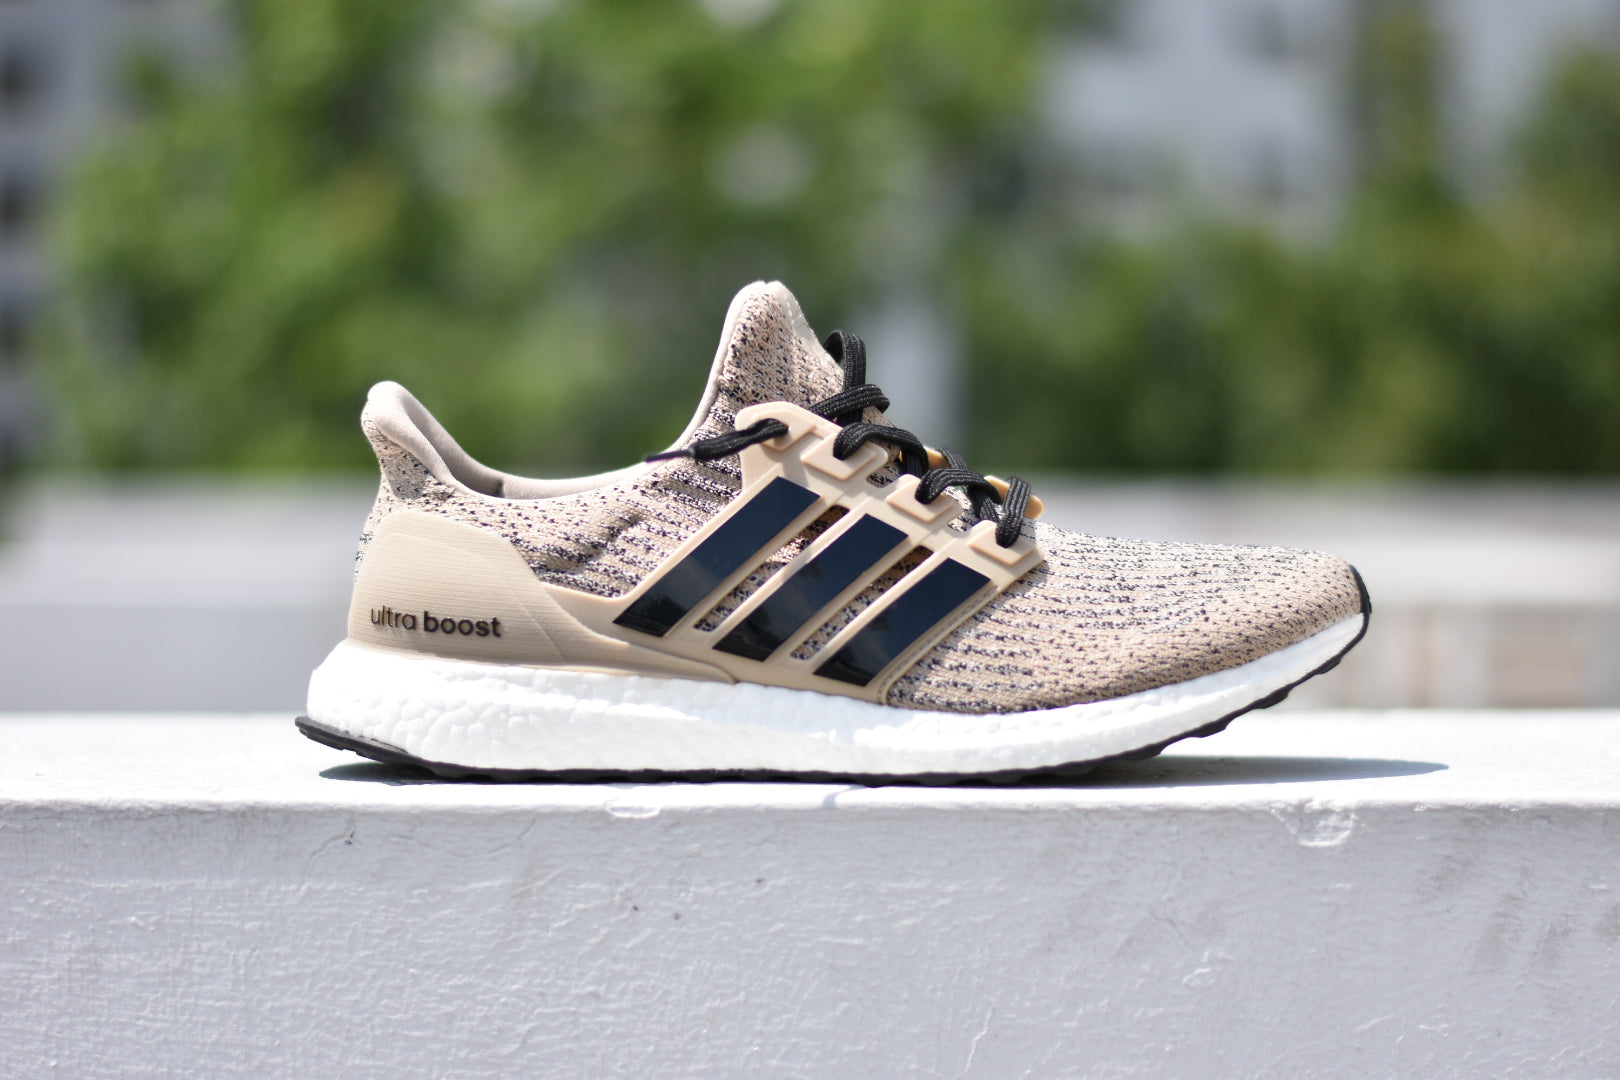 Transform Boost 3.0 Trace Khaki into a Limited Edition colo Slickies